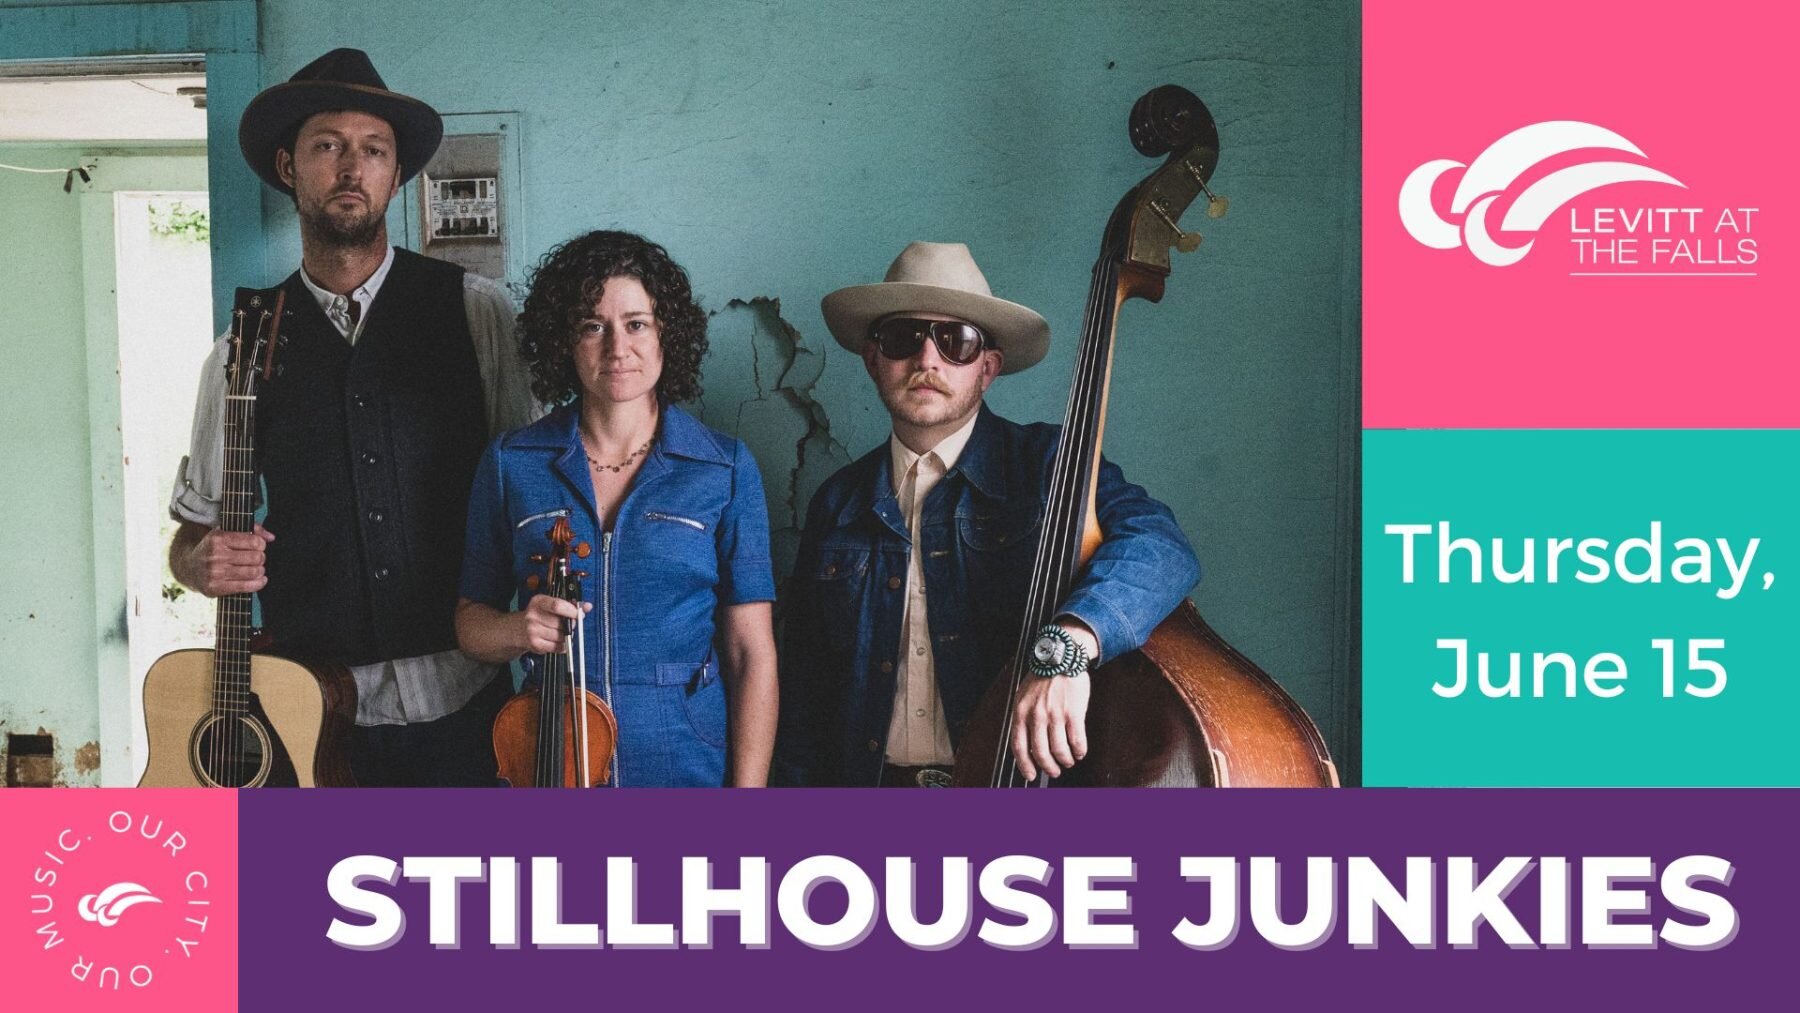 JUST ANNOUNCED! We're headed to @levittsiouxfalls in SD on June 15th! They put together a killer lineup of over 50 FREE shows for the summer; we're excited to be a part of it! 

#fiddle #vanlife #stringband #touringband #songwriters #americana #trio 